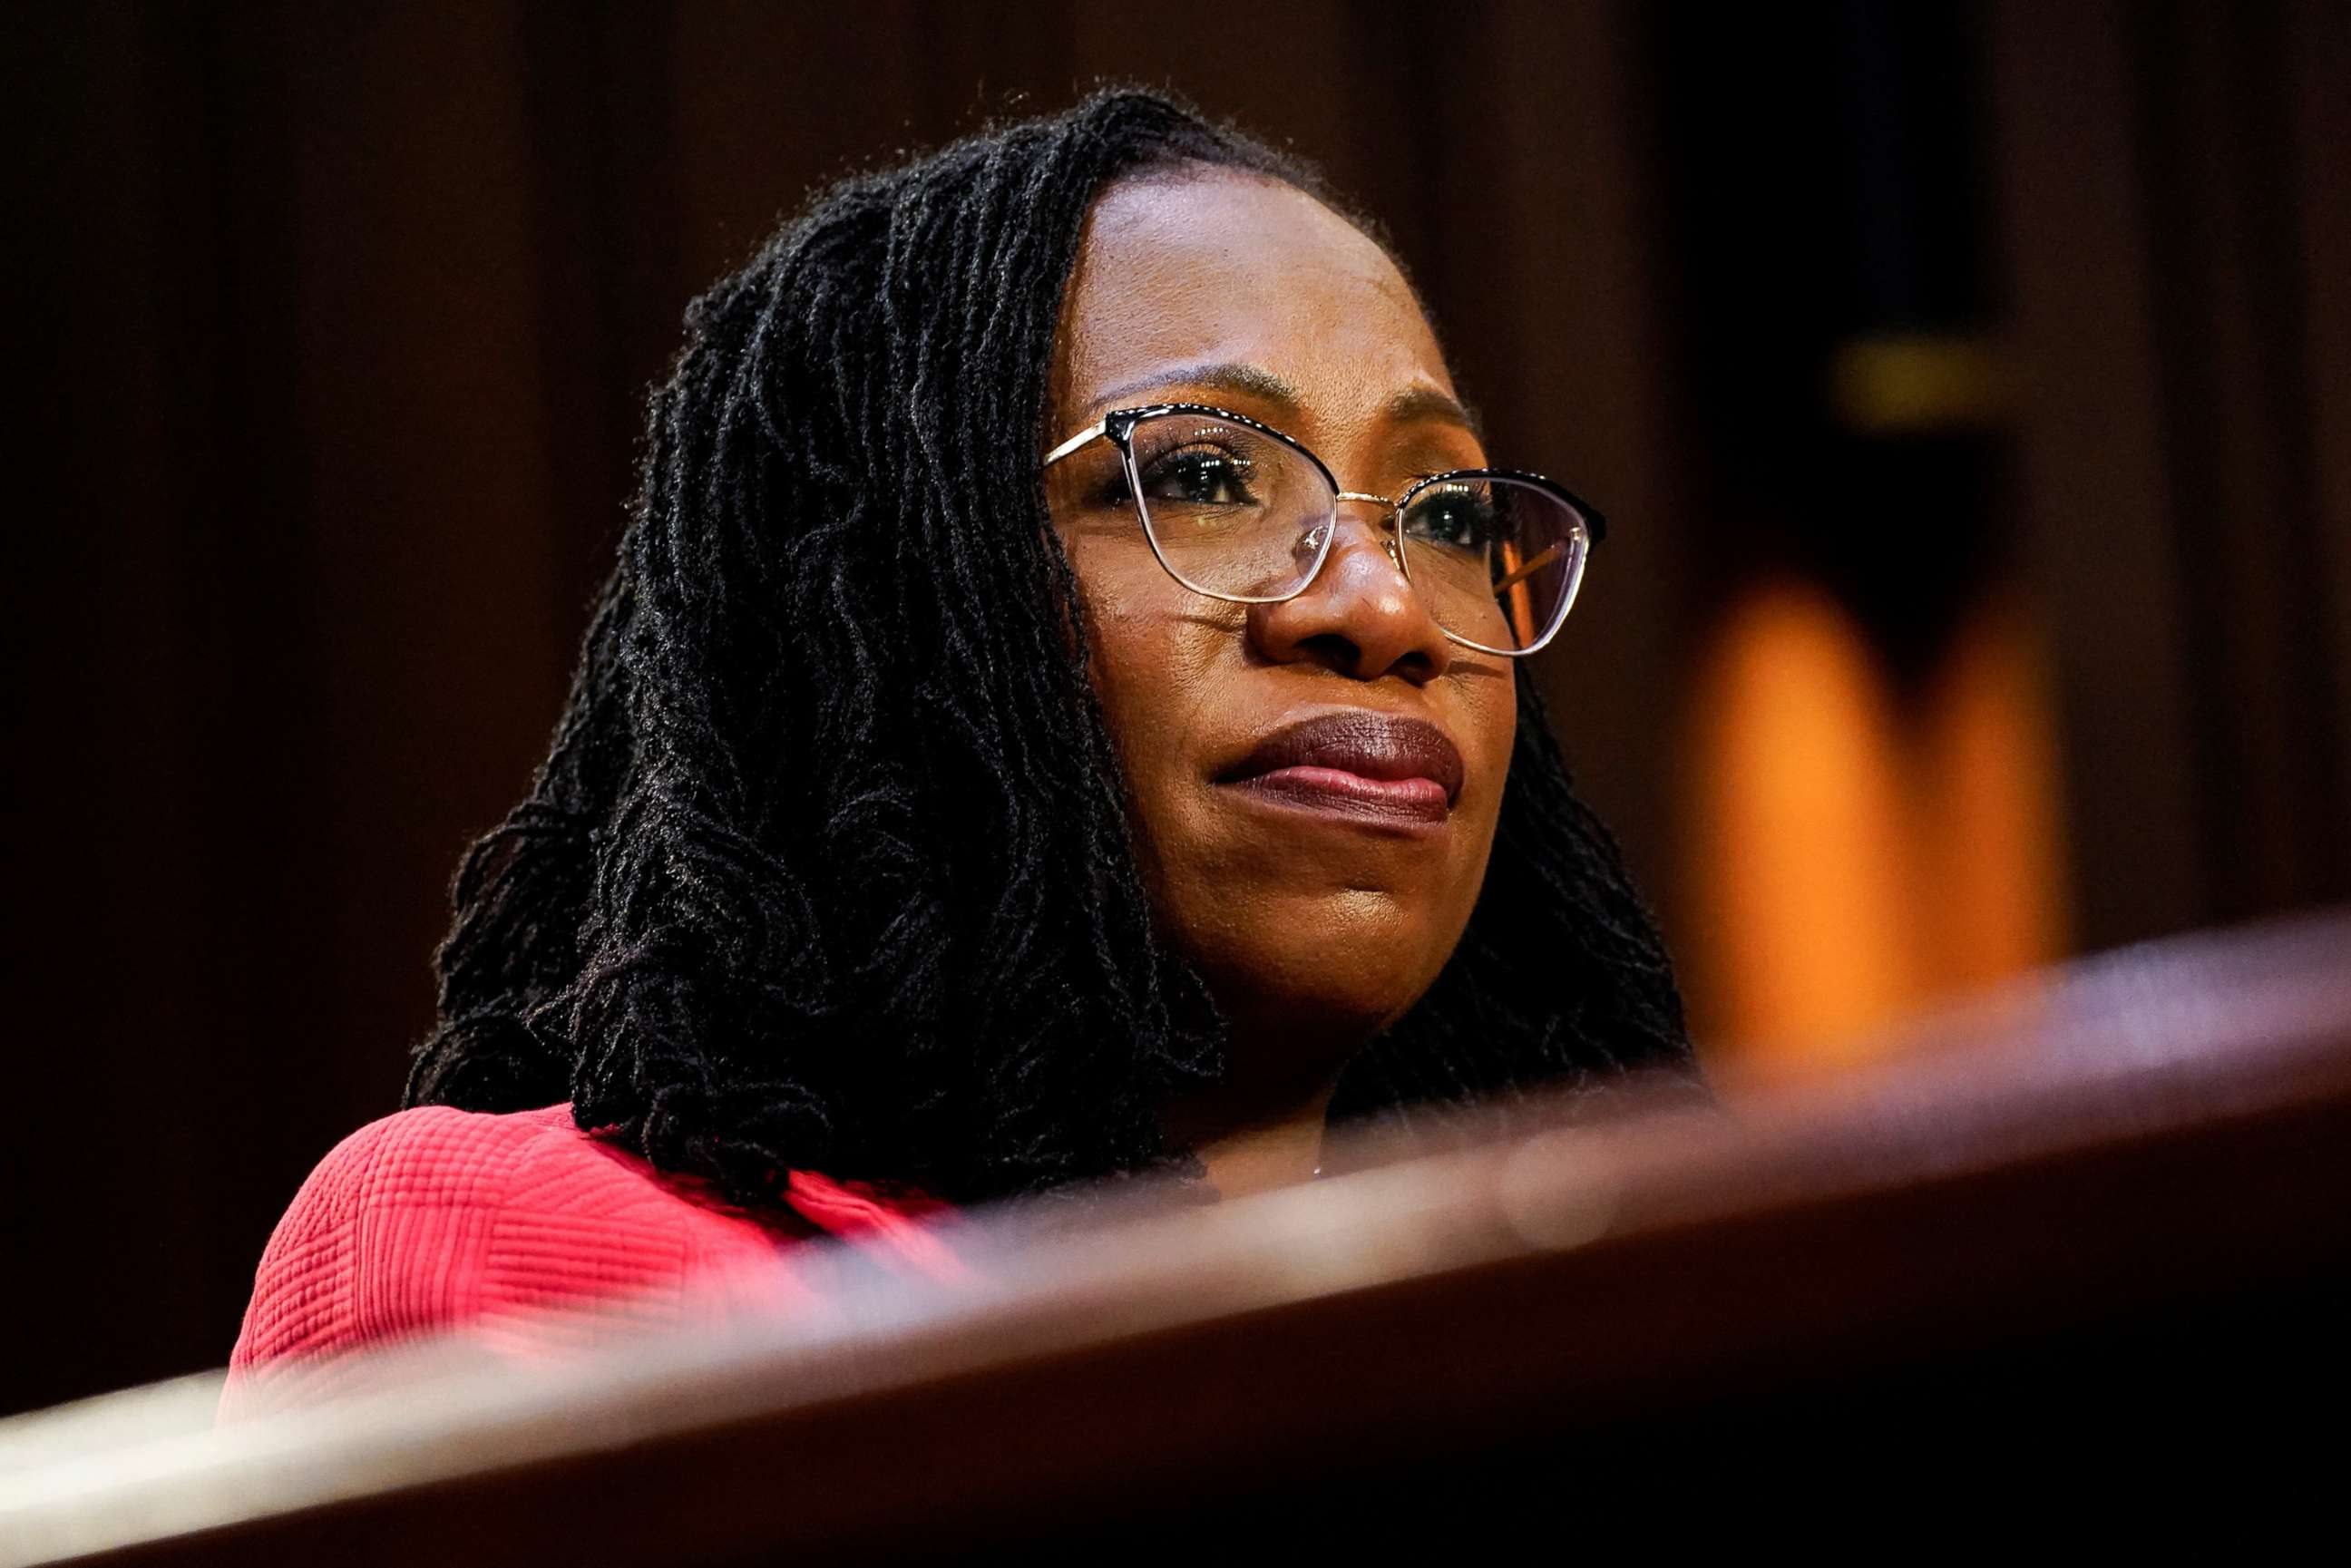 PHOTO: Judge Ketanji Brown Jackson listens to questions from U.S. Senator Ted Cruz as she testifies during a Senate Judiciary Committee confirmation hearing on her nomination to the U.S. Supreme Court, on Capitol Hill in Washington, March 22, 2022.